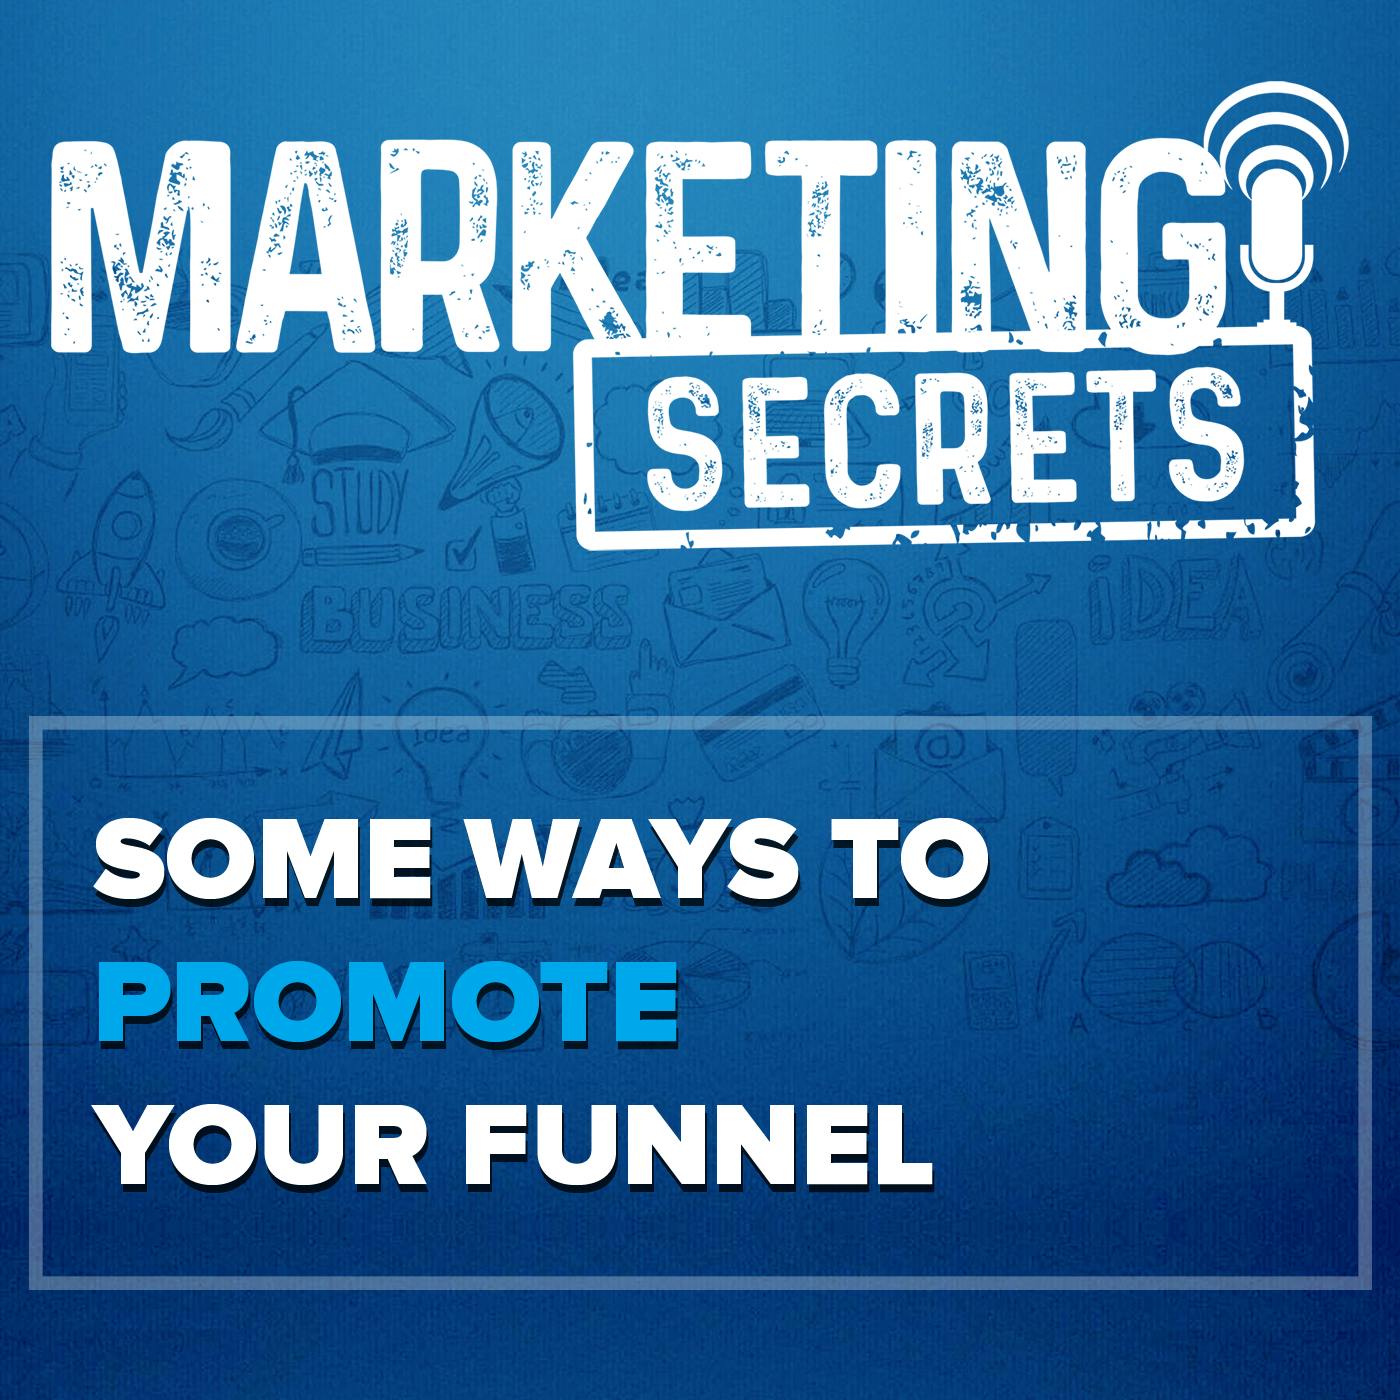 Some Ways To Promote Your Funnel by Russell Brunson